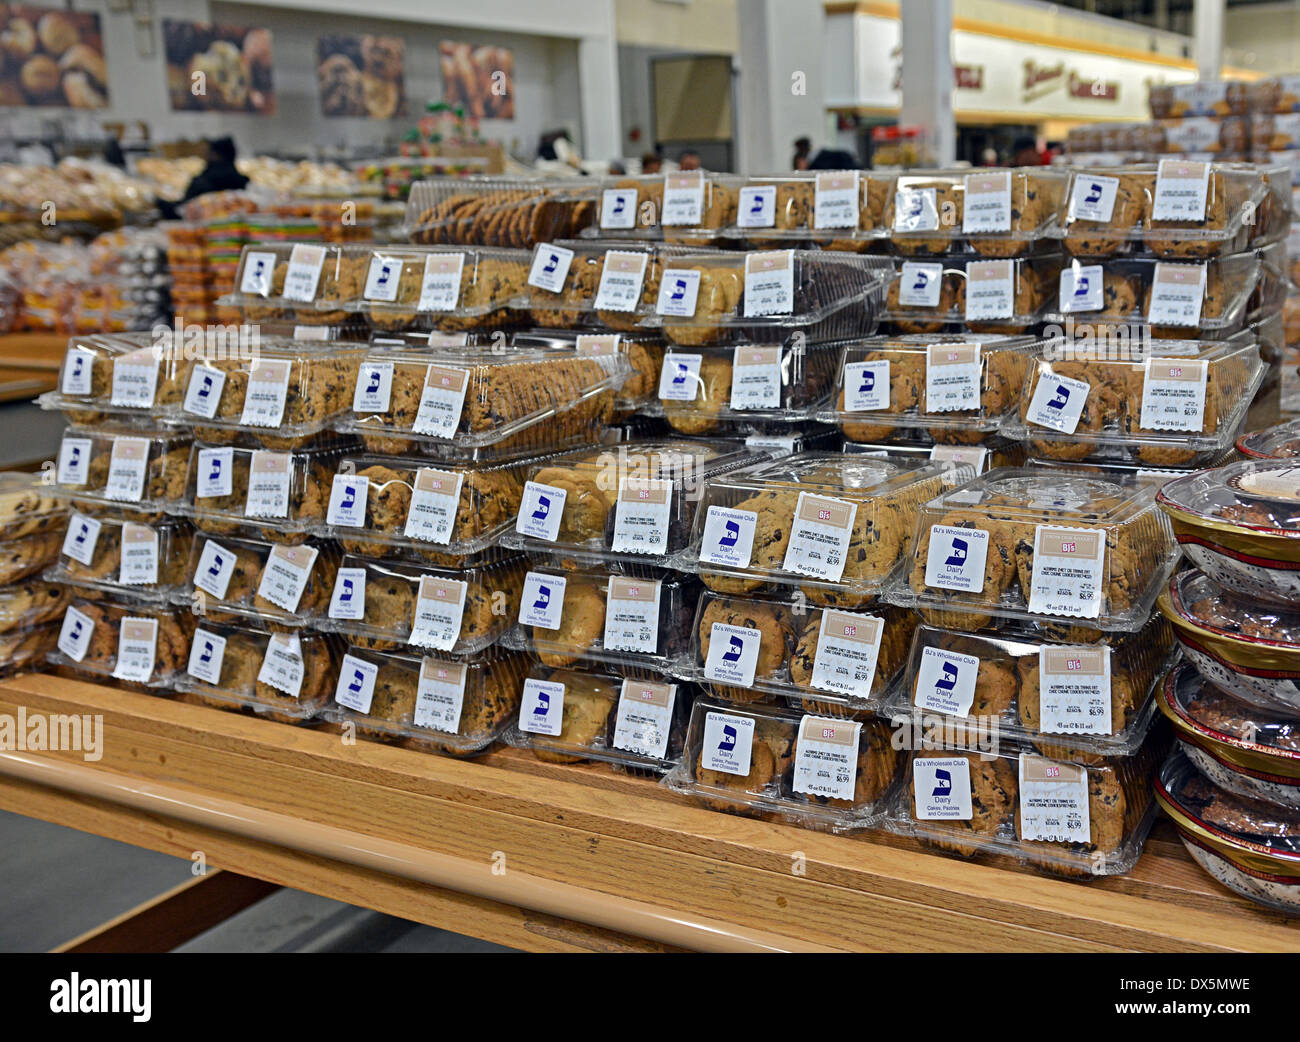 Kosher cookies for sale at BJ's Wholesale Club in Whitestone, Queens, New York Stock Photo